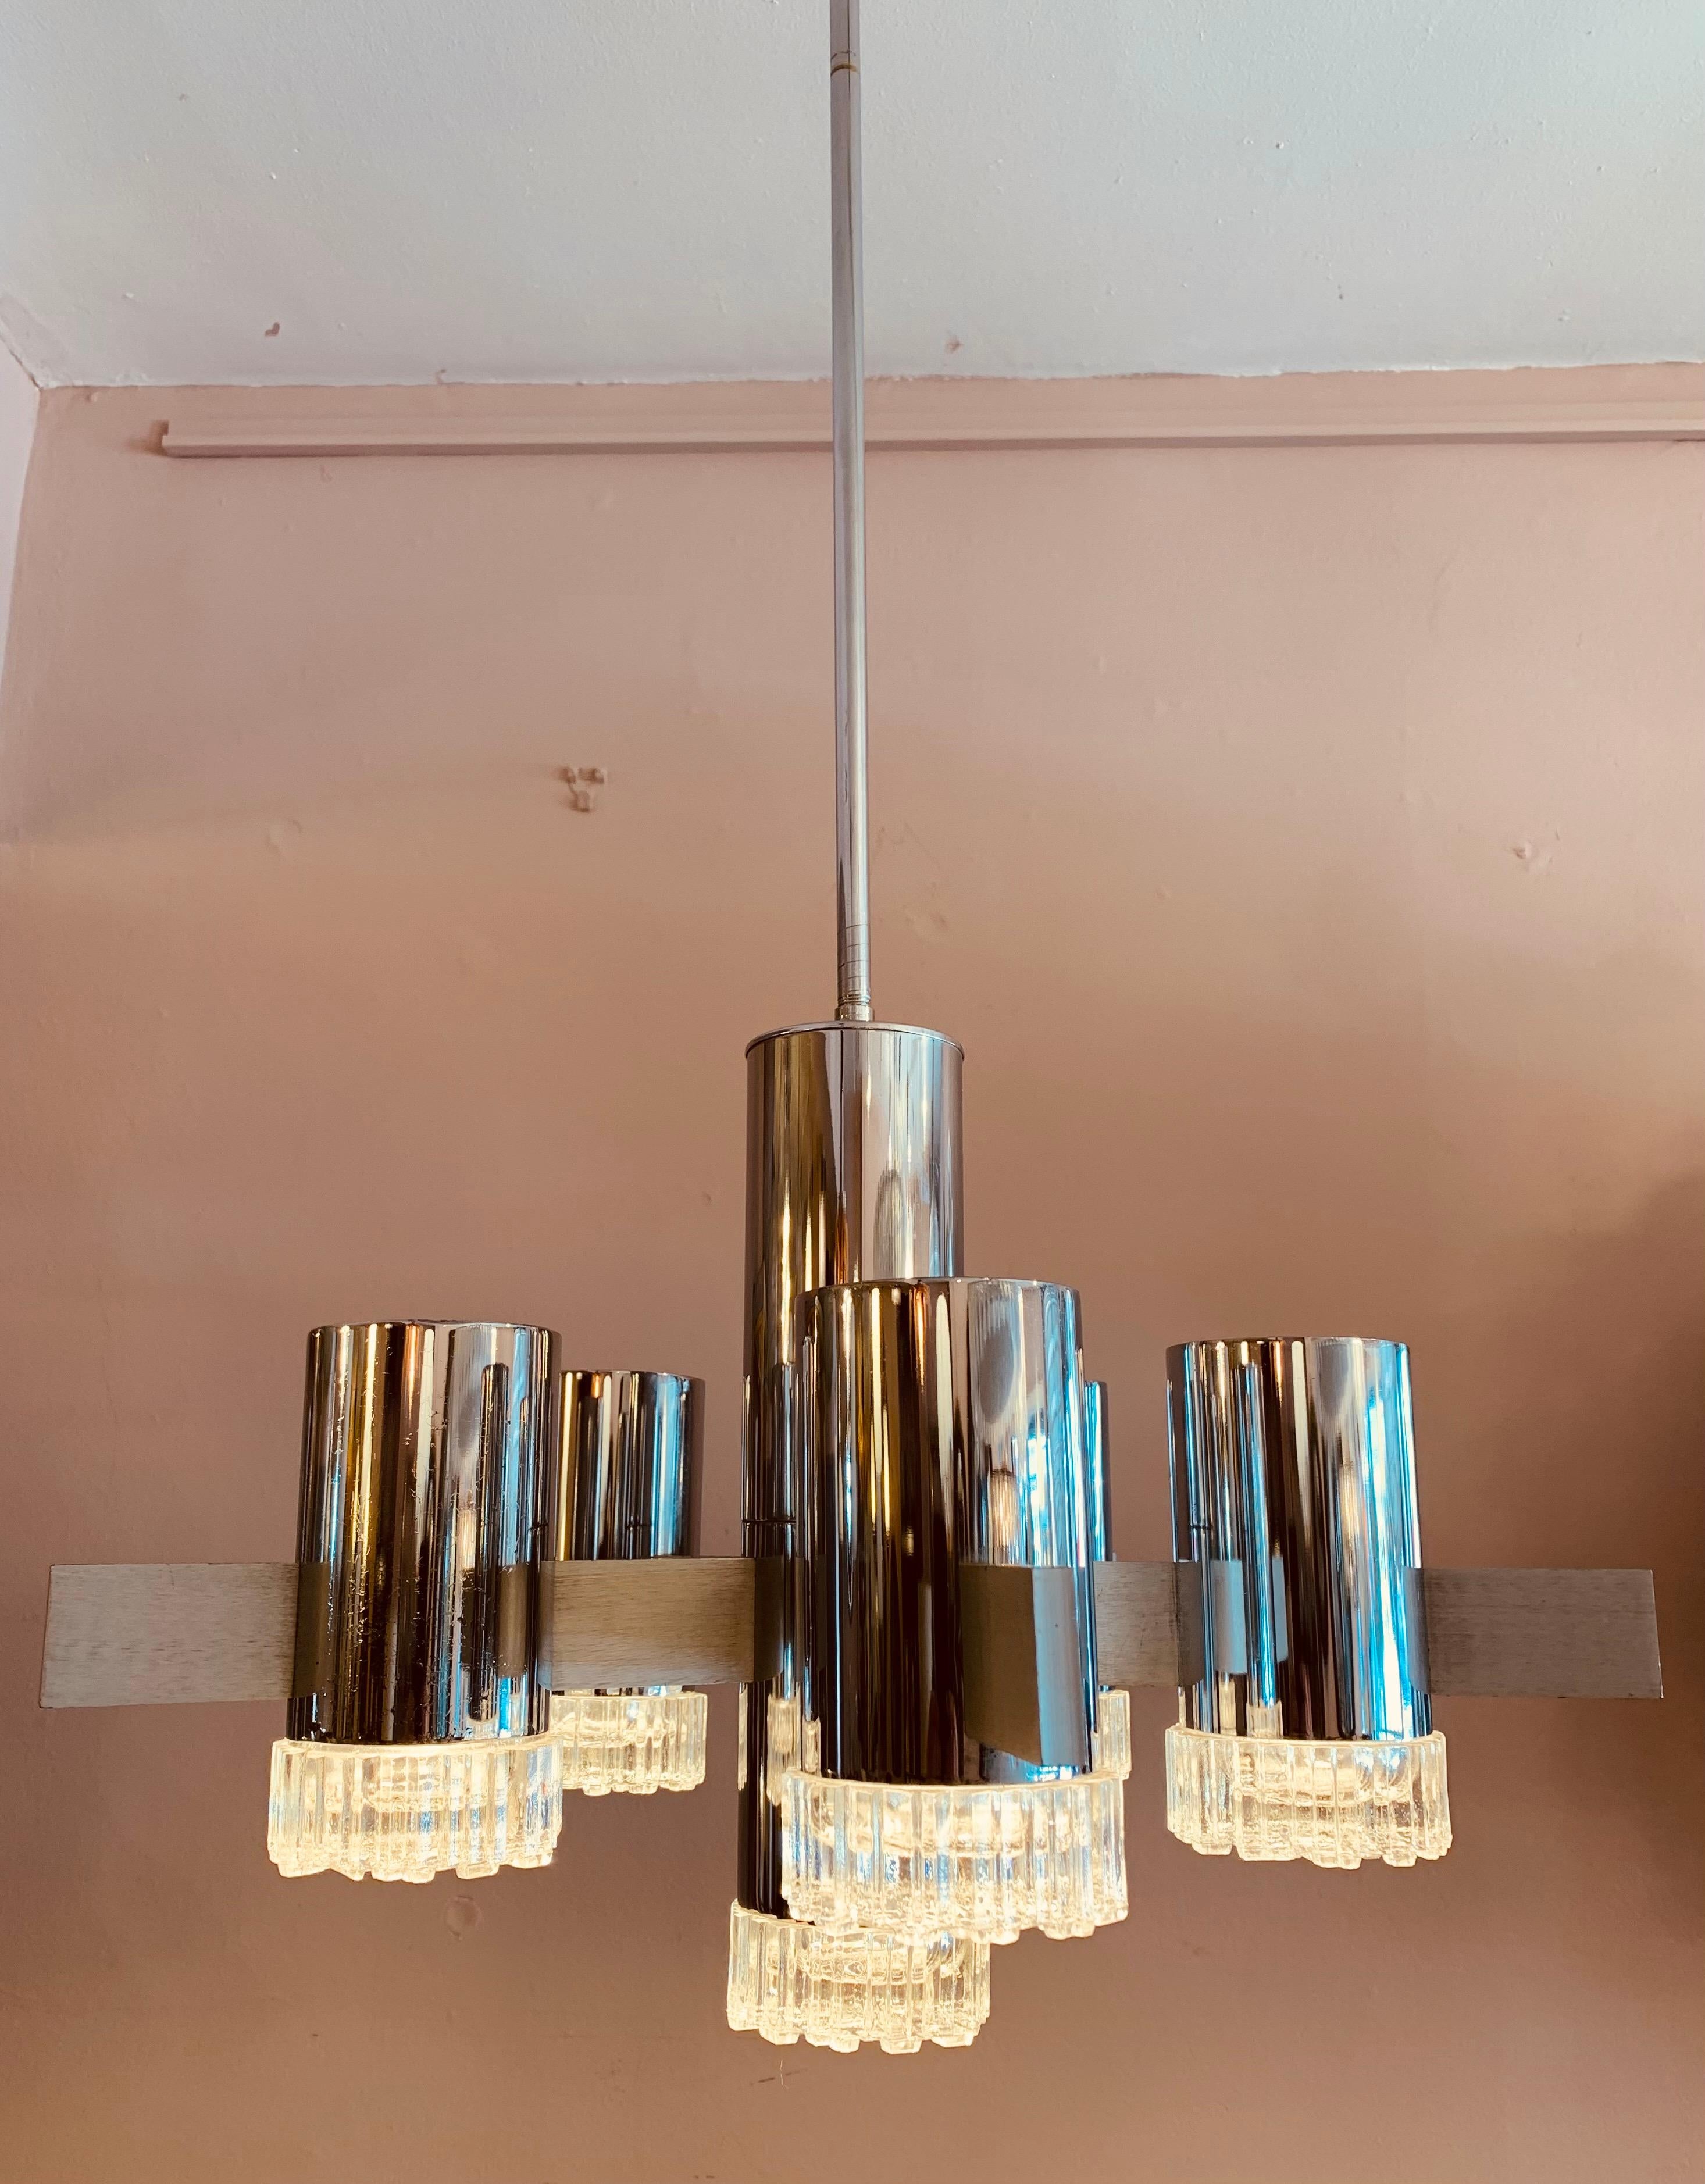 An unusual and abstract ceiling light designed by Gaetano Sciolari for Sciolari. Polished vertical chrome metal tubes house each bulb which are capped at the bottom by a moulded geometric patterned glass light diffuser. Each tube is supported by